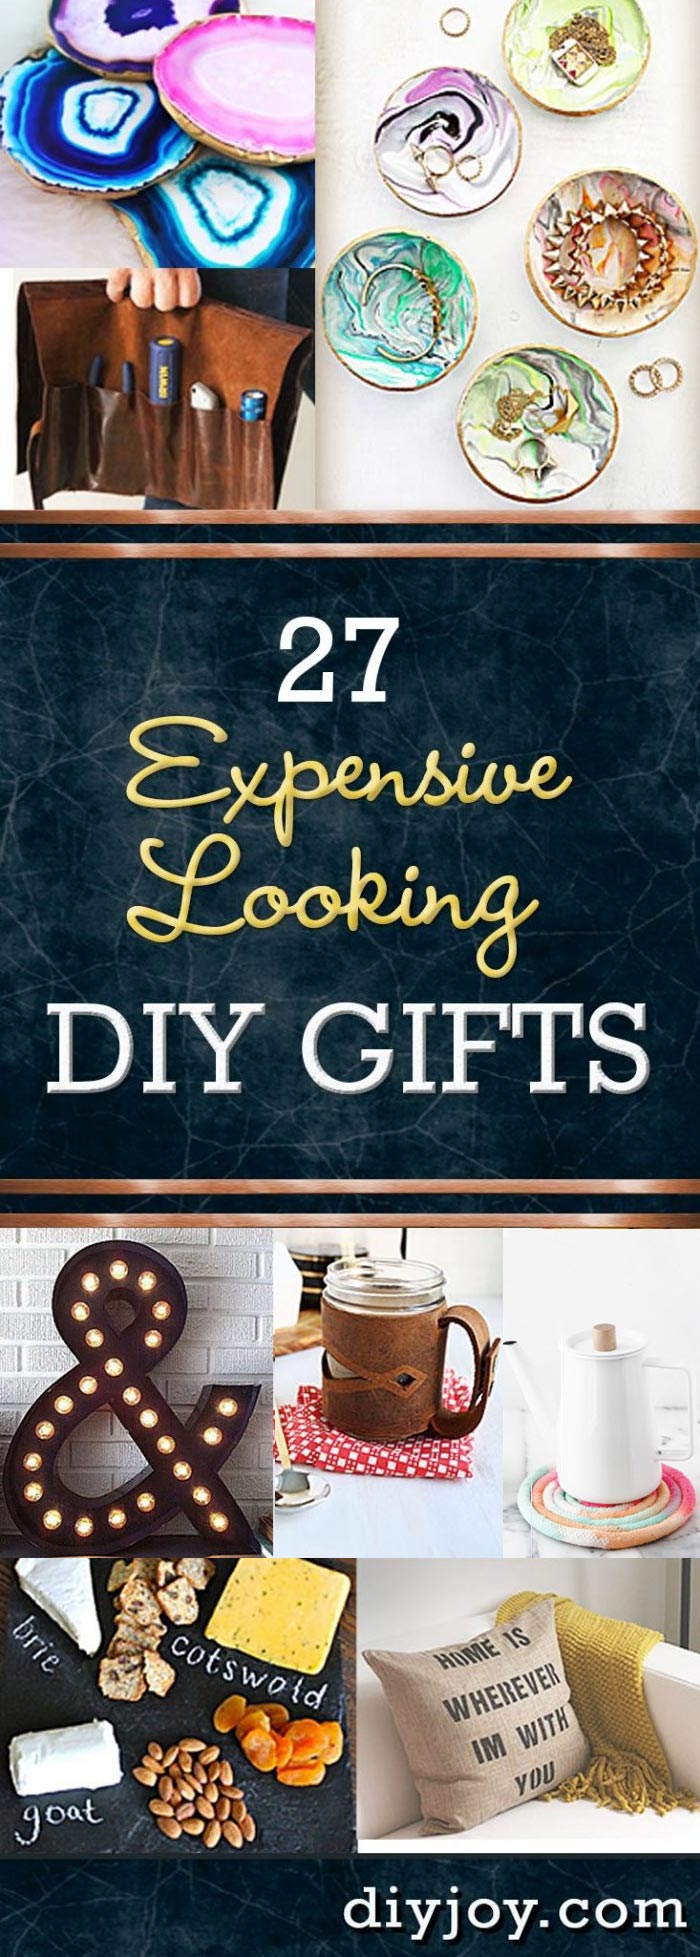 27 Expensive Looking Inexpensive DIY Gifts